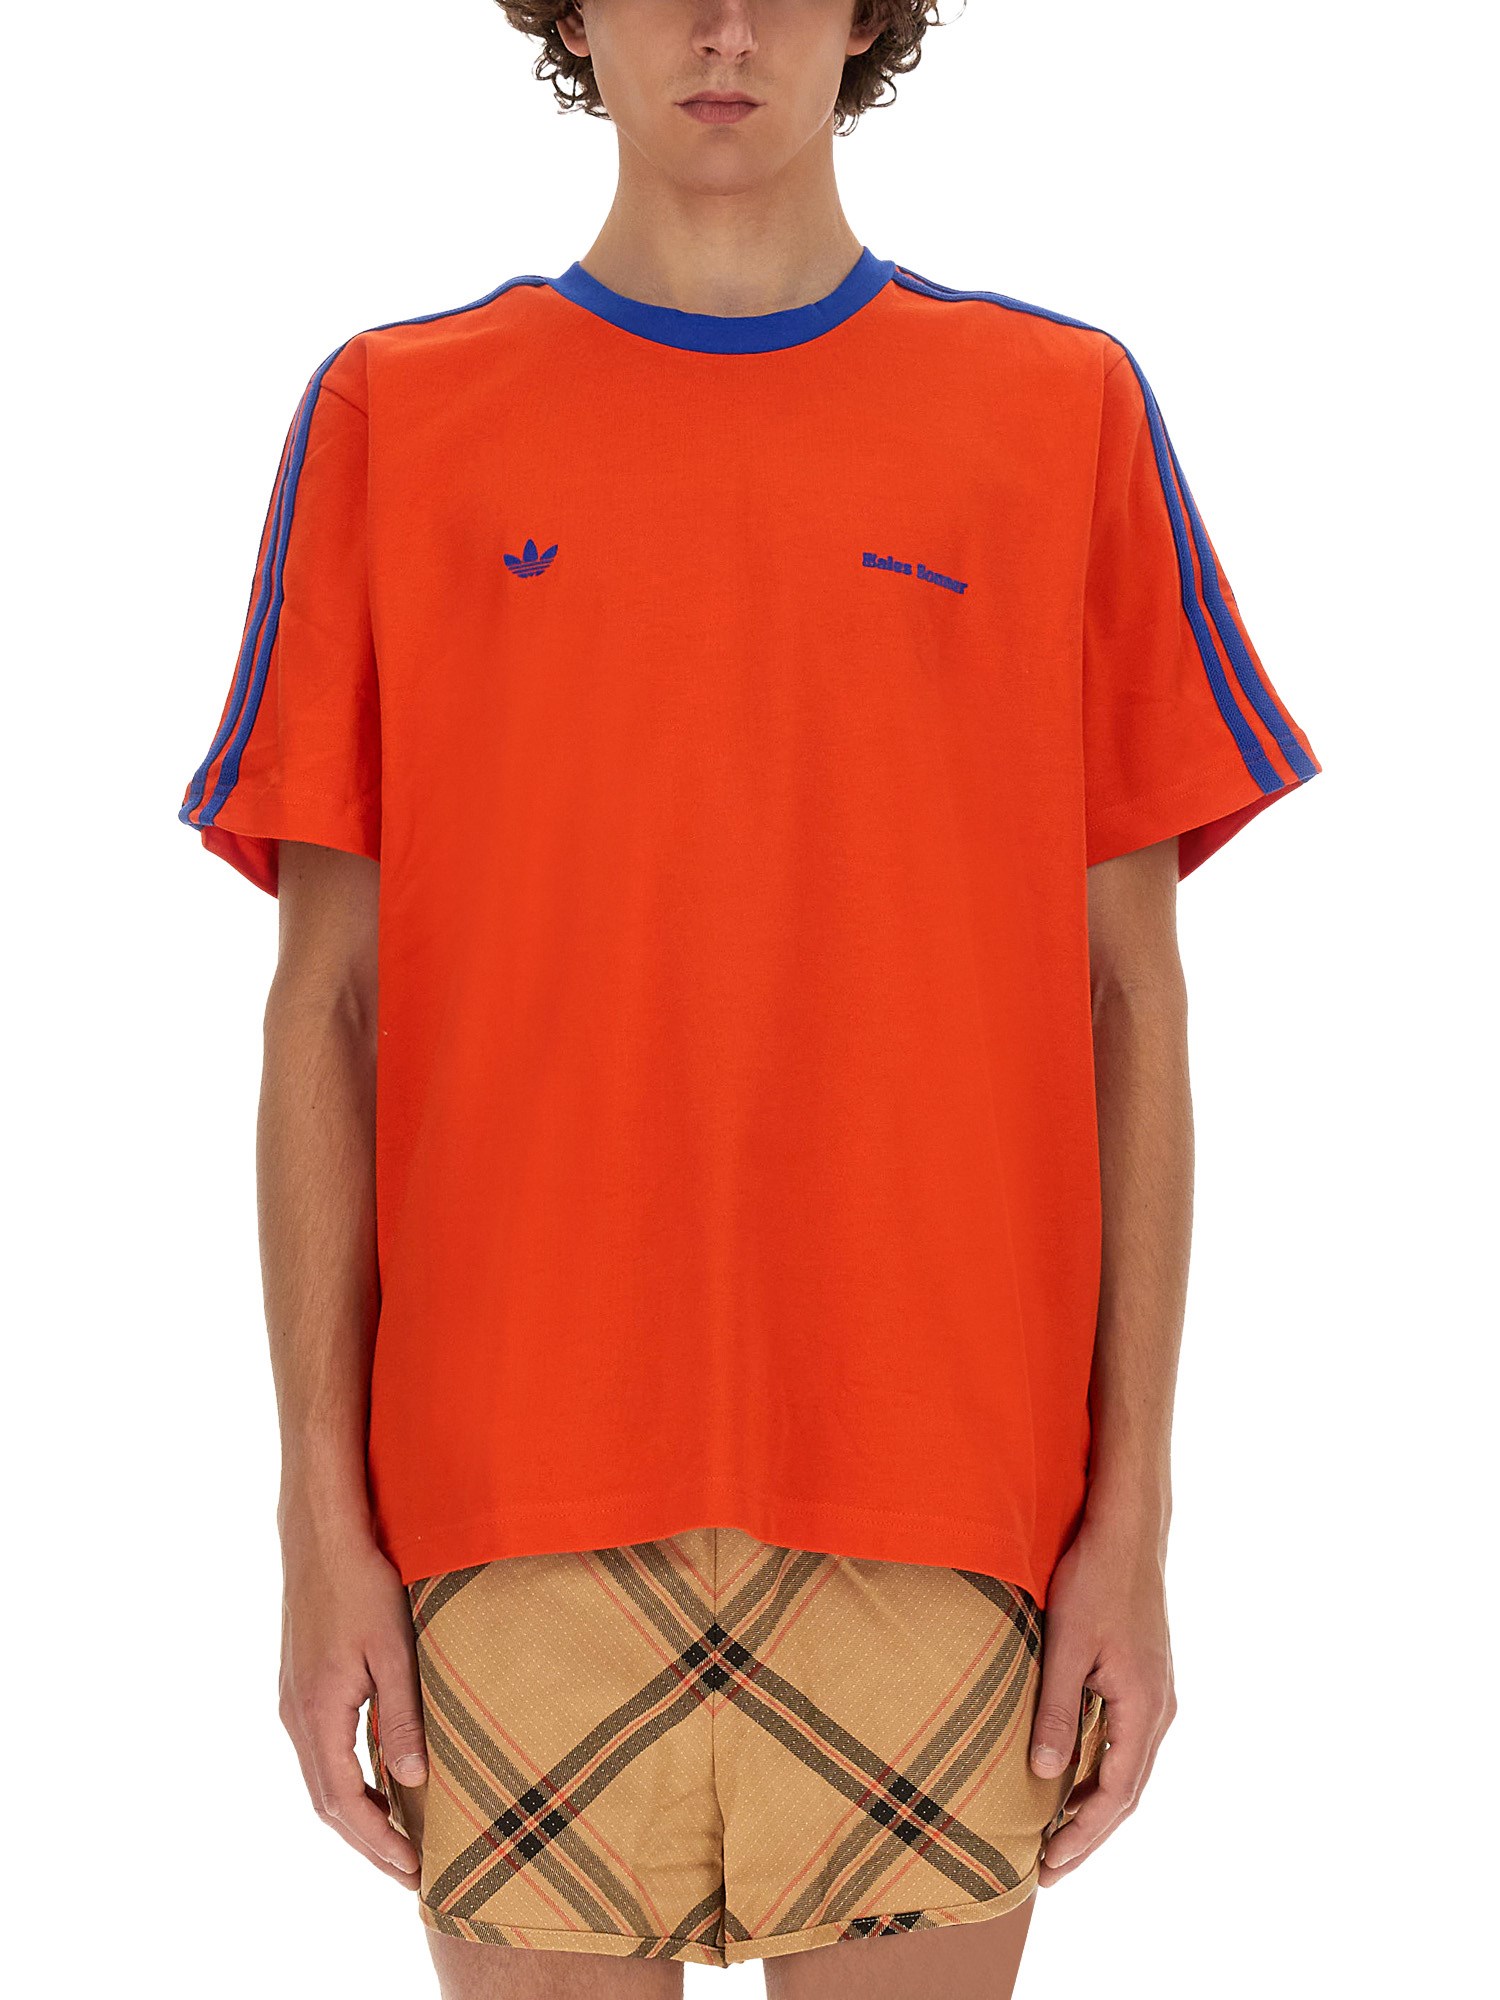 adidas x wales bonner adidas x wales bonner t-shirt with logo